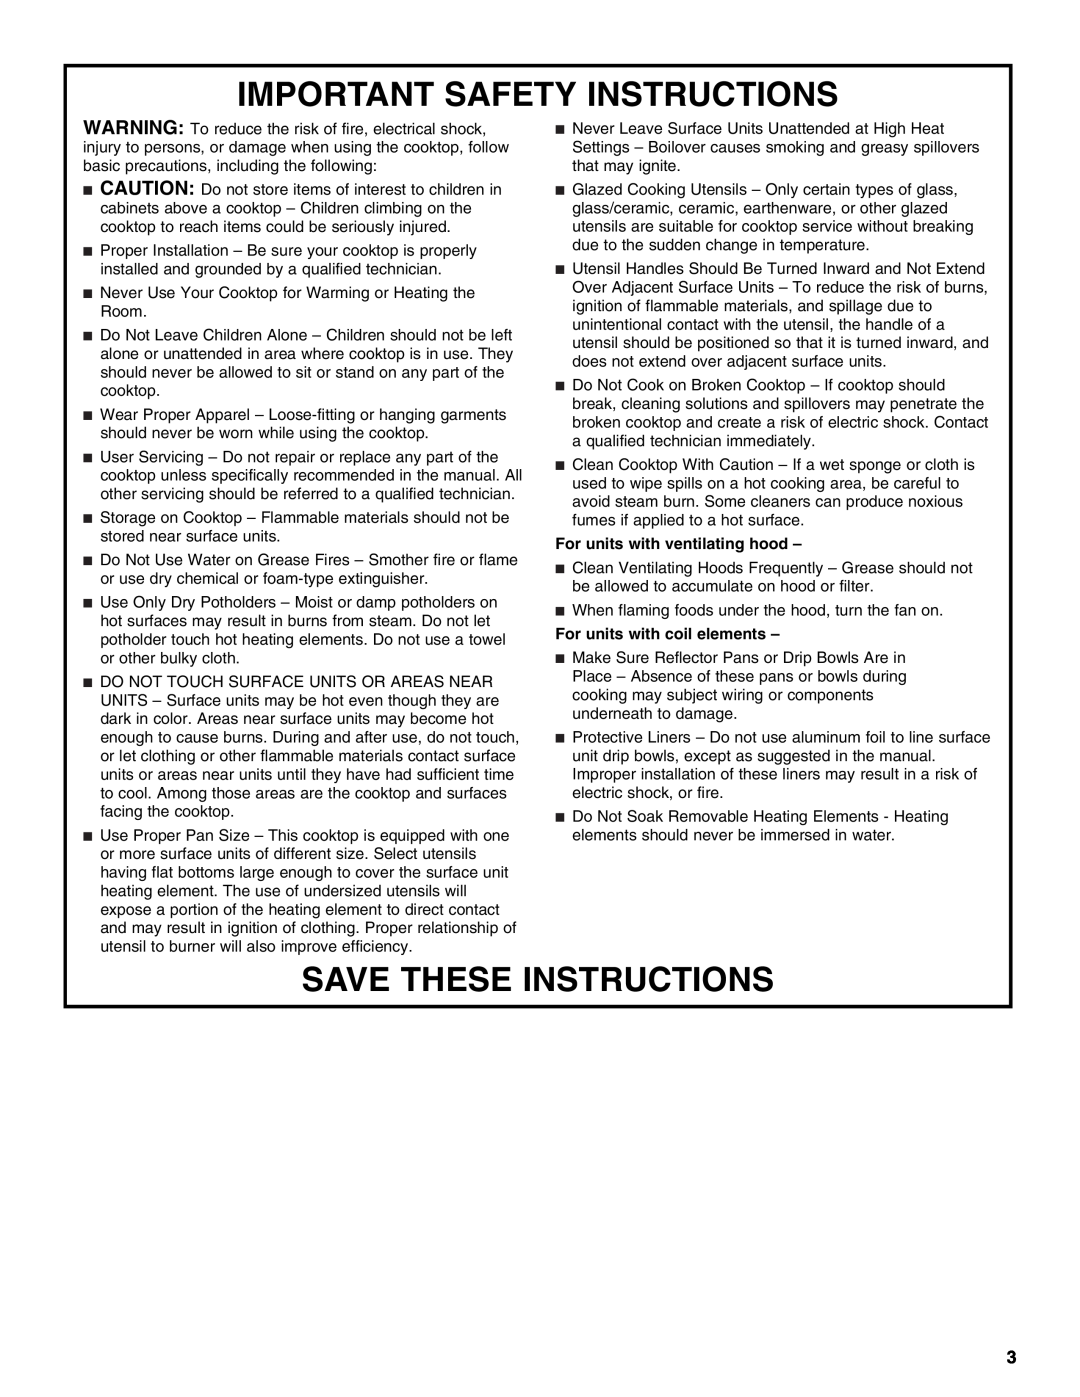 Whirlpool G7CE3635XB, G7CE3034XP Important Safety Instructions, Save These Instructions, For units with ventilating hood 